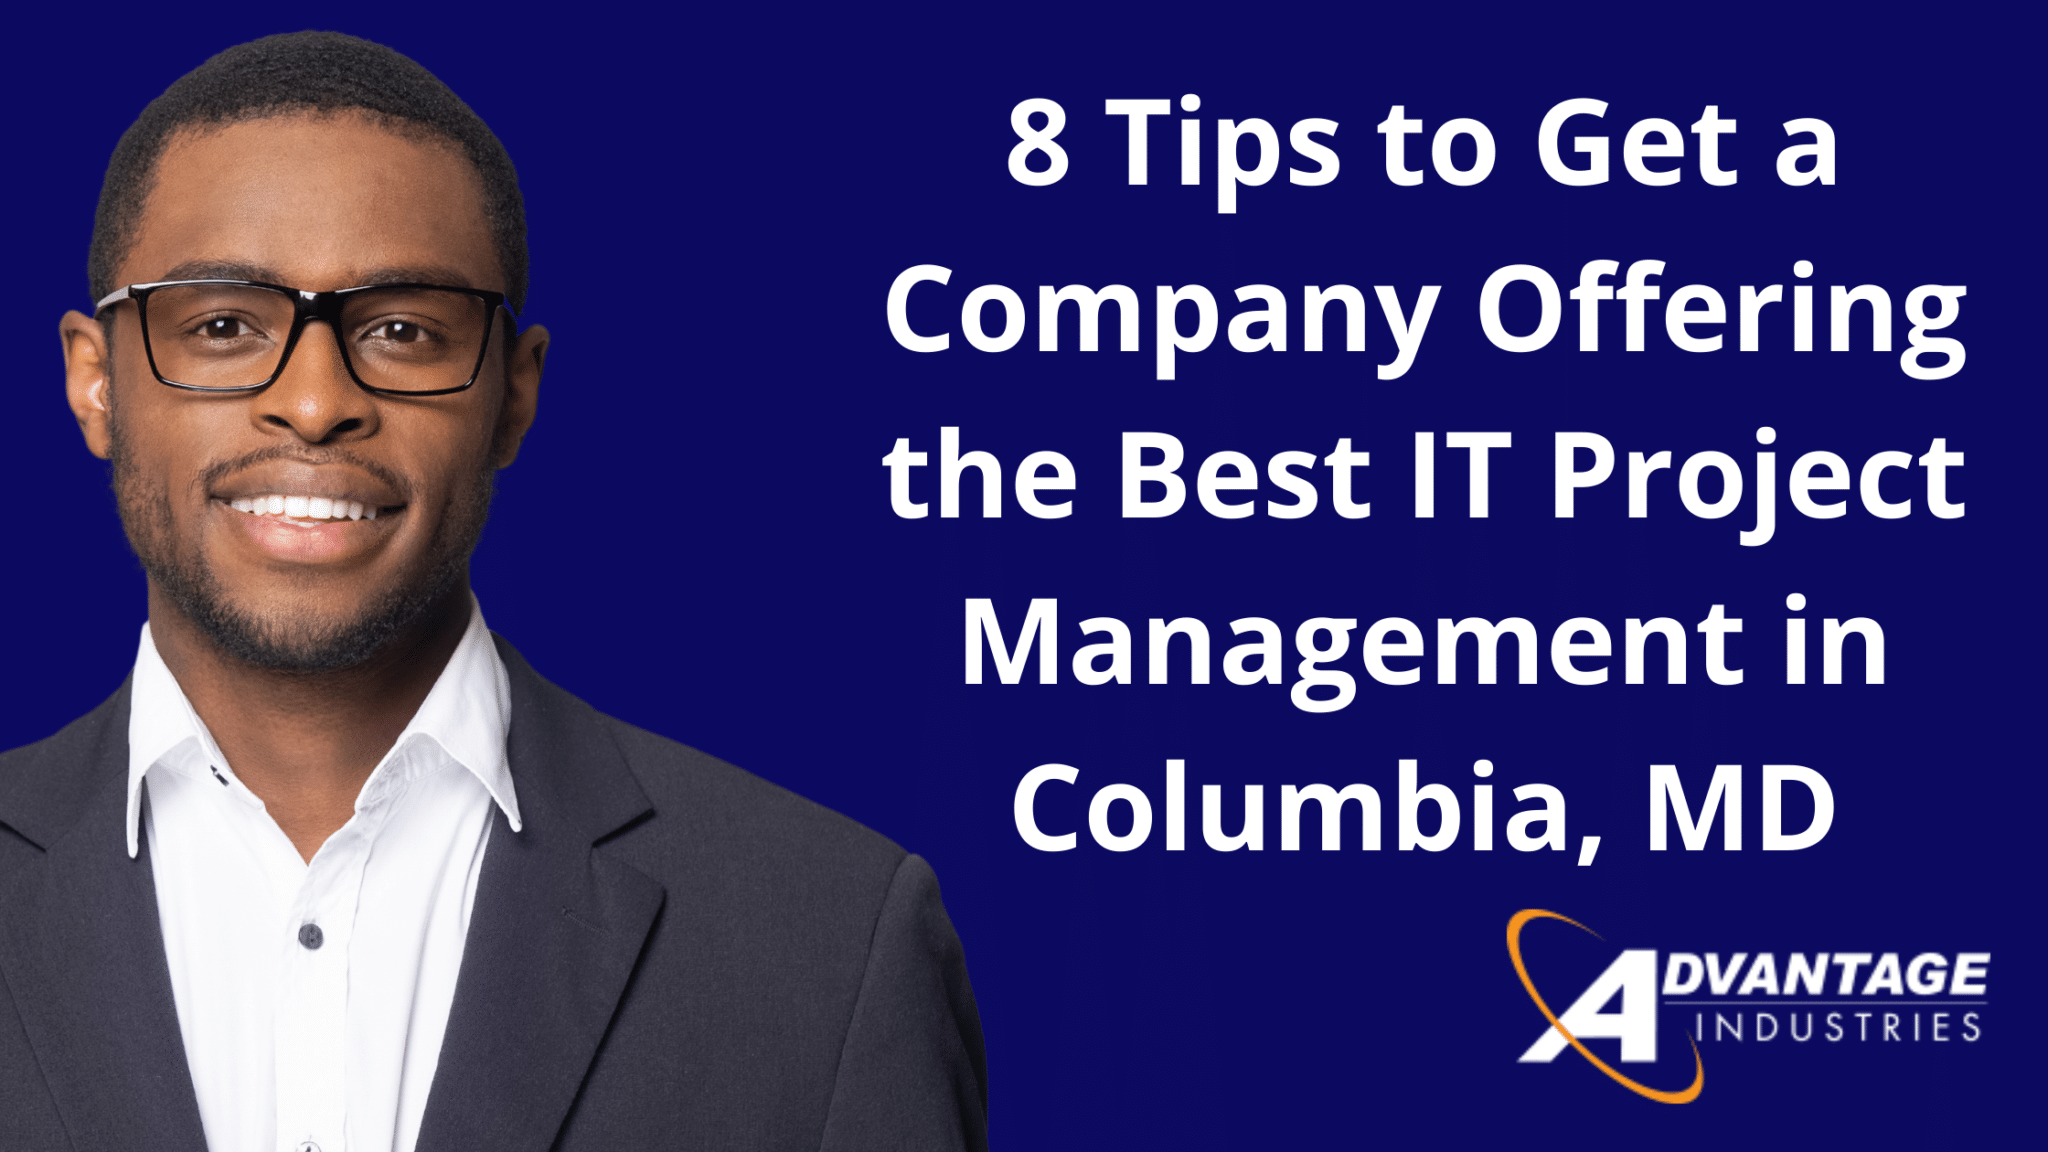 8 Tips to Get a Company Offering the Best IT Project Management in Columbia, MD